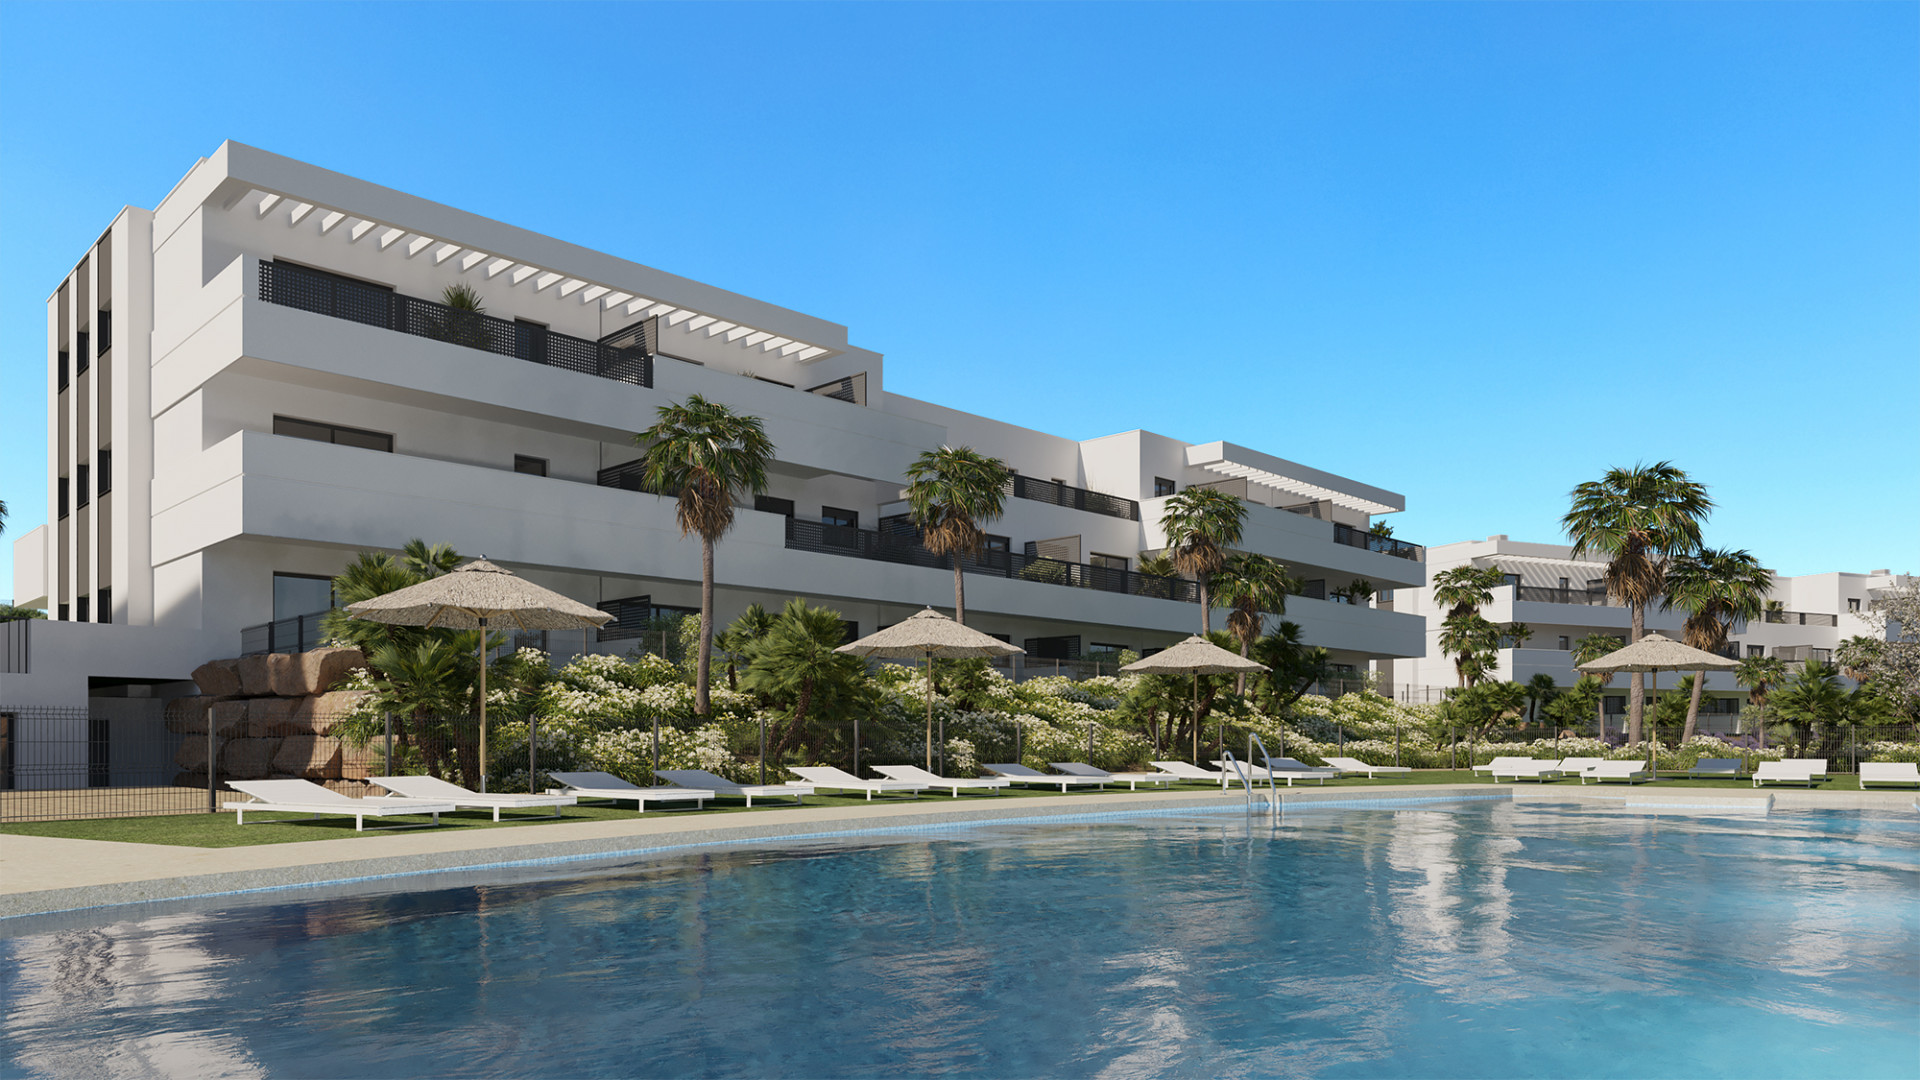 Off-plan development of modern luxury apartments for sale in Estepona